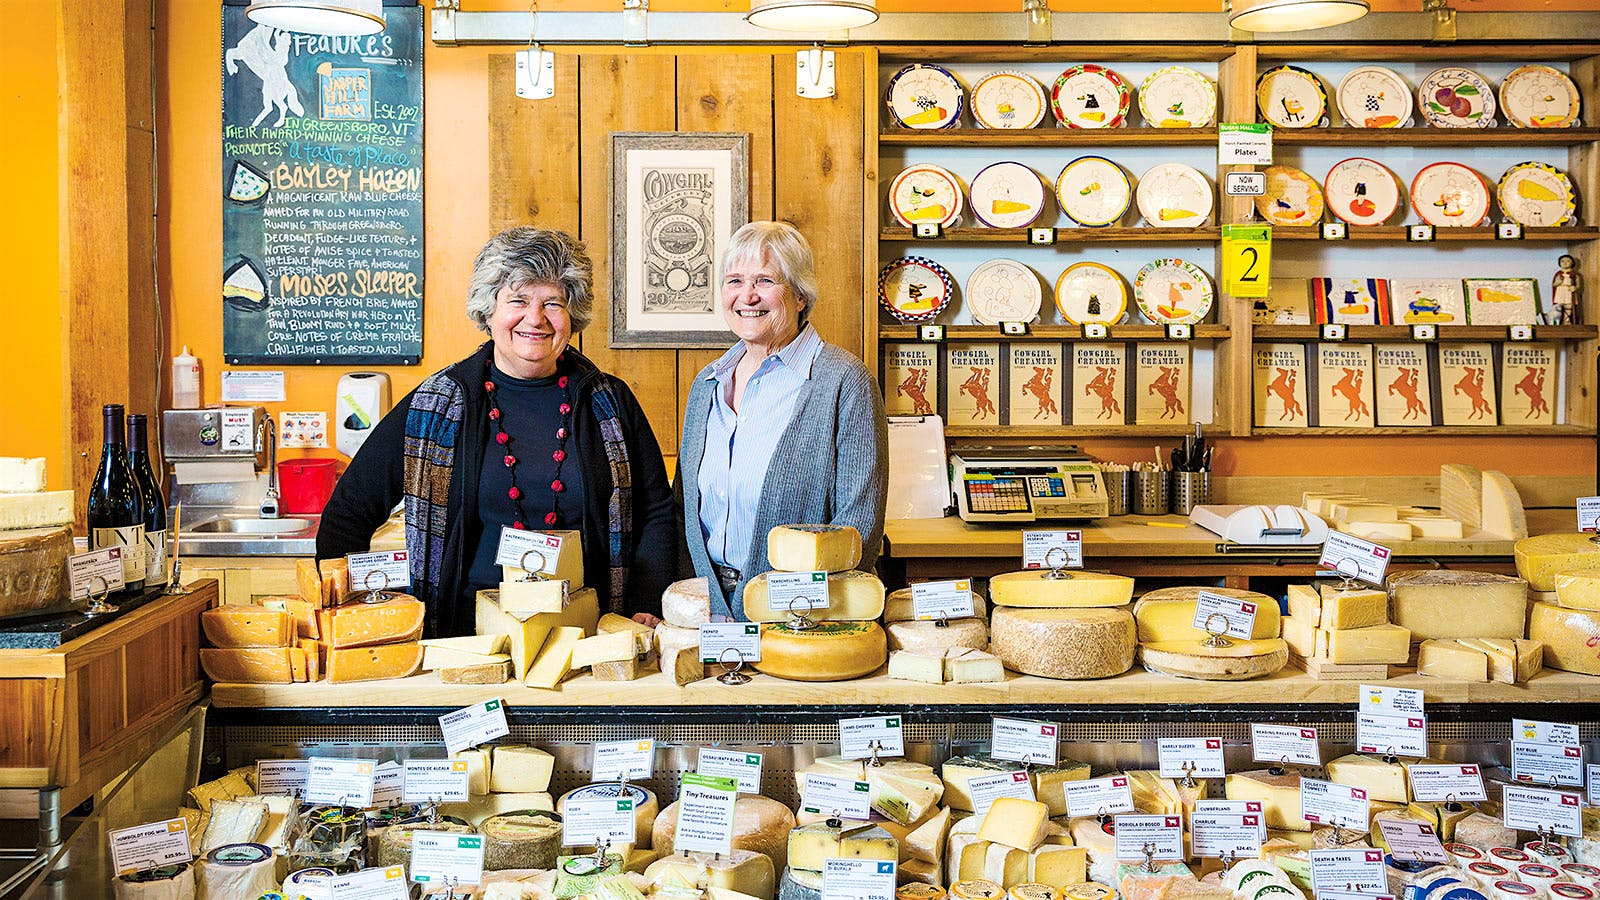 Community First at Cowgirl Creamery